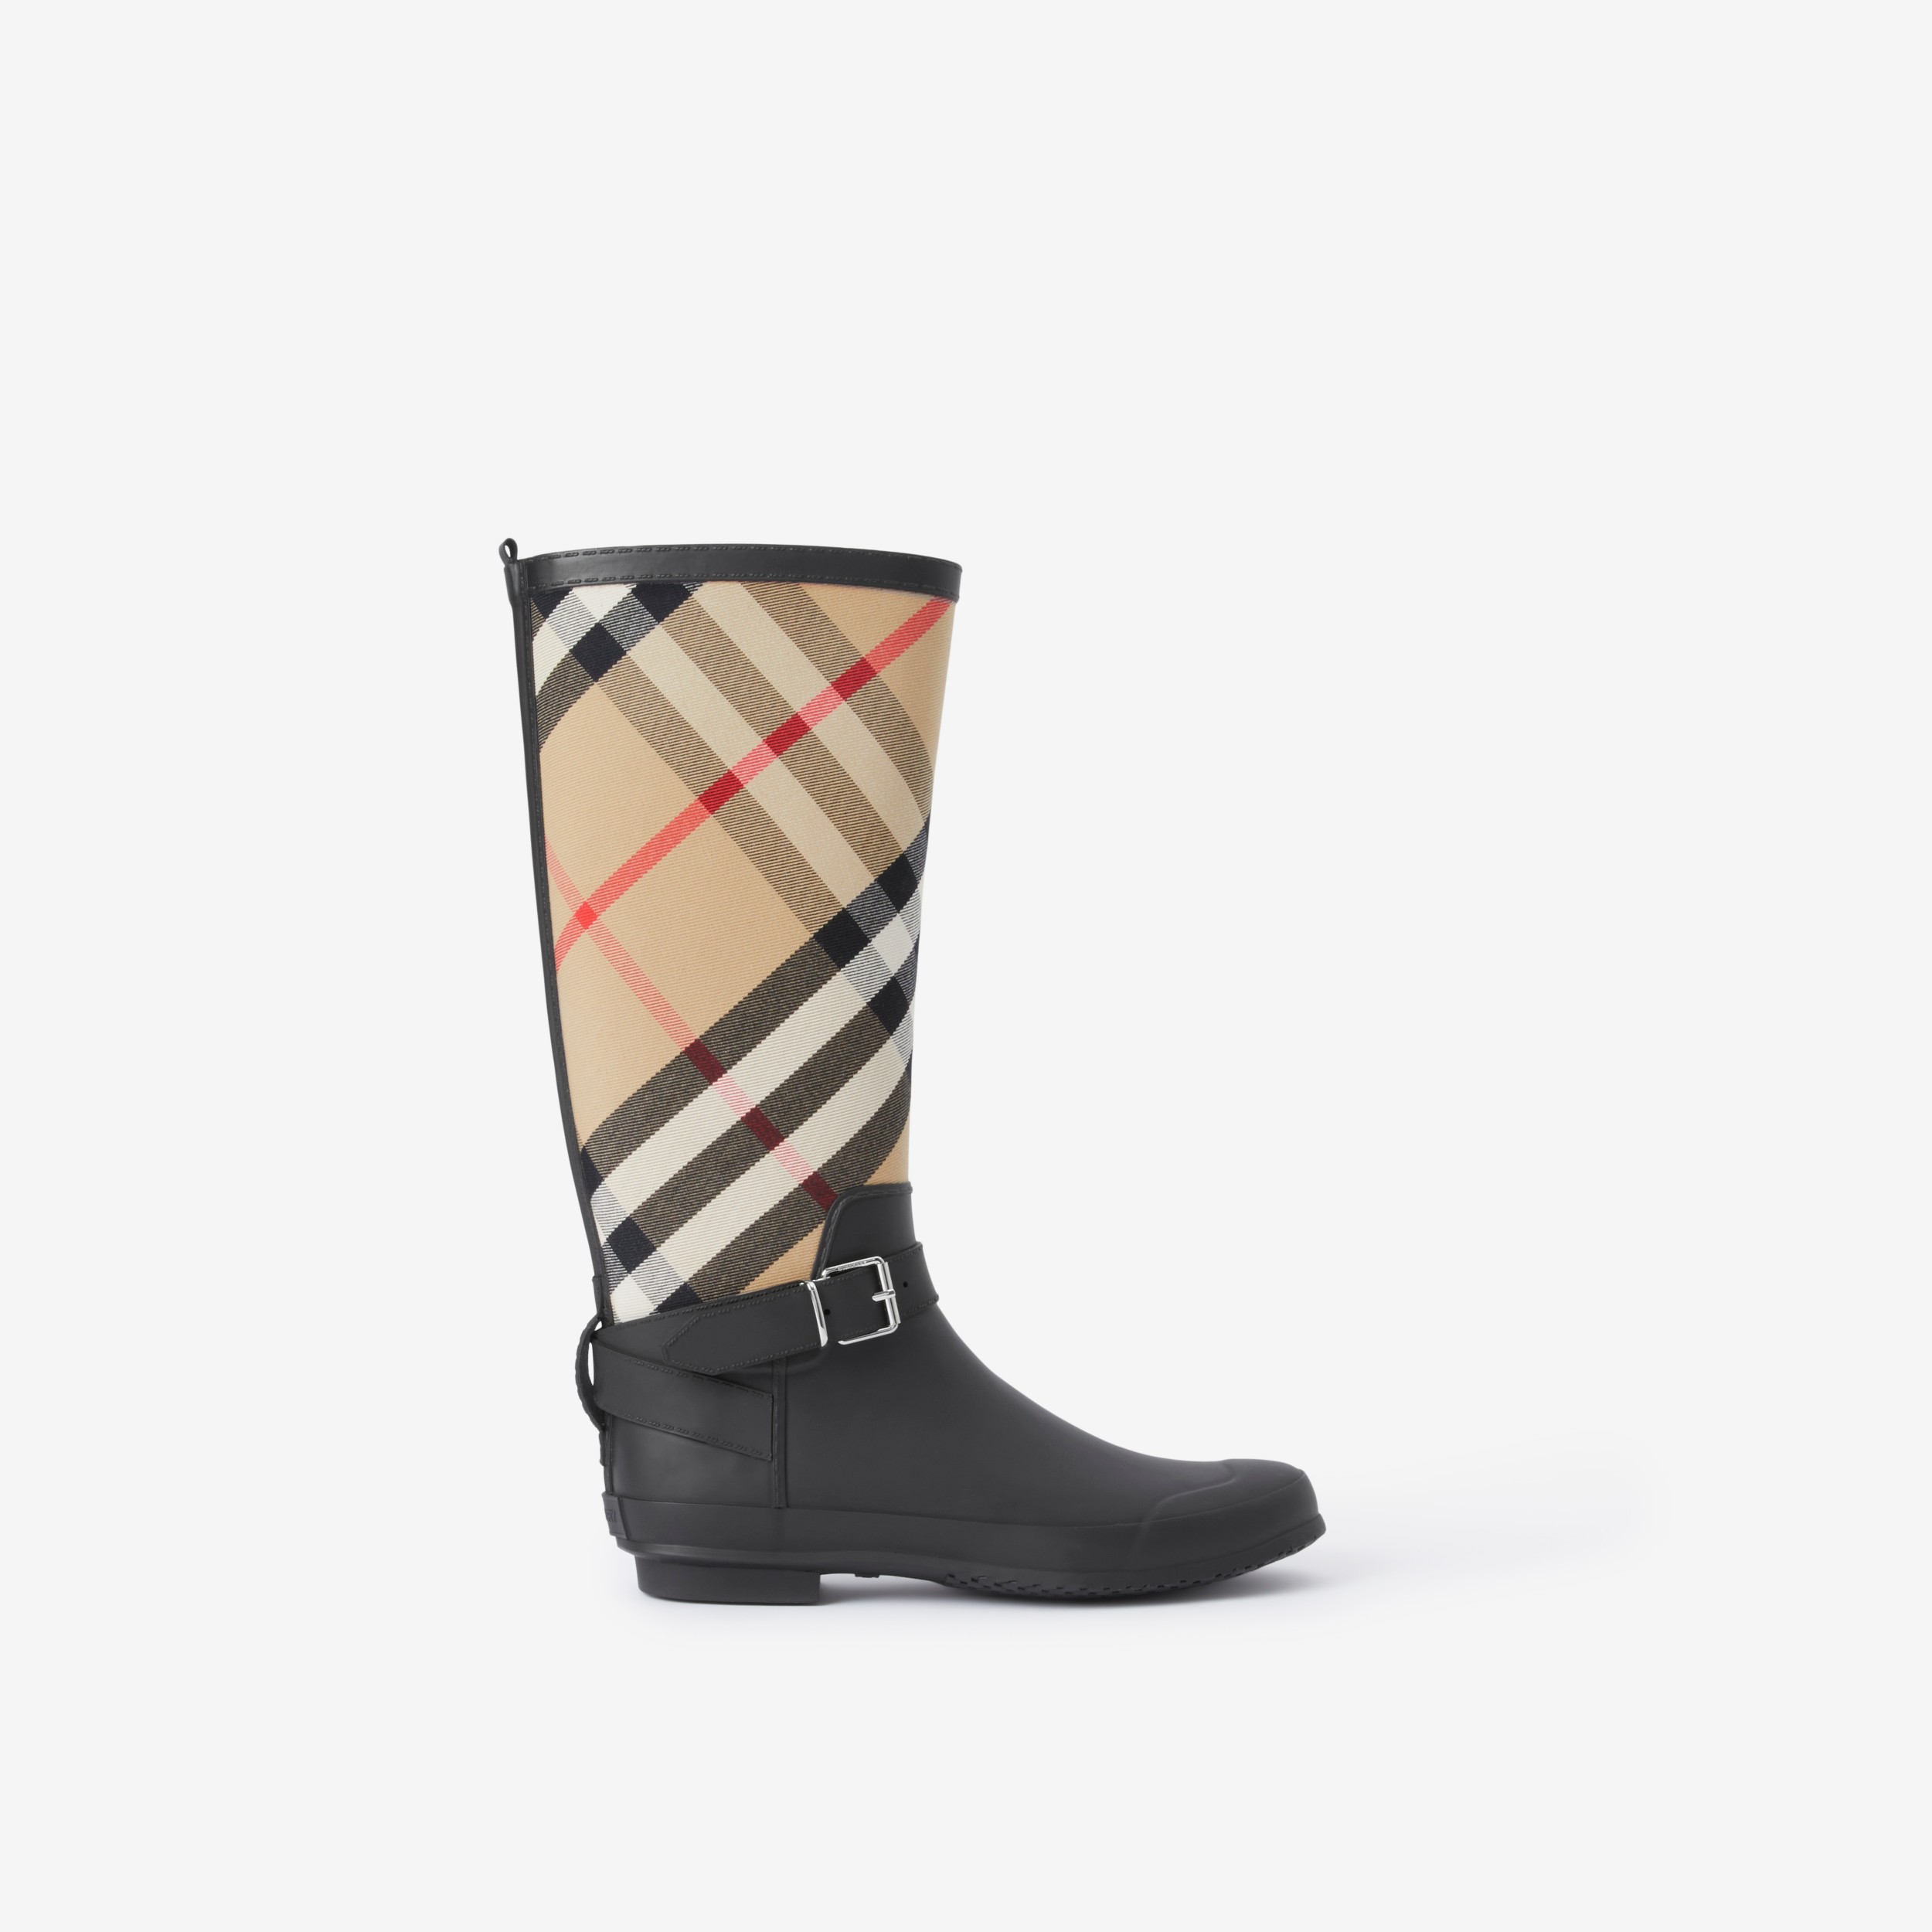 How Much Are Burberry Rain Boots?